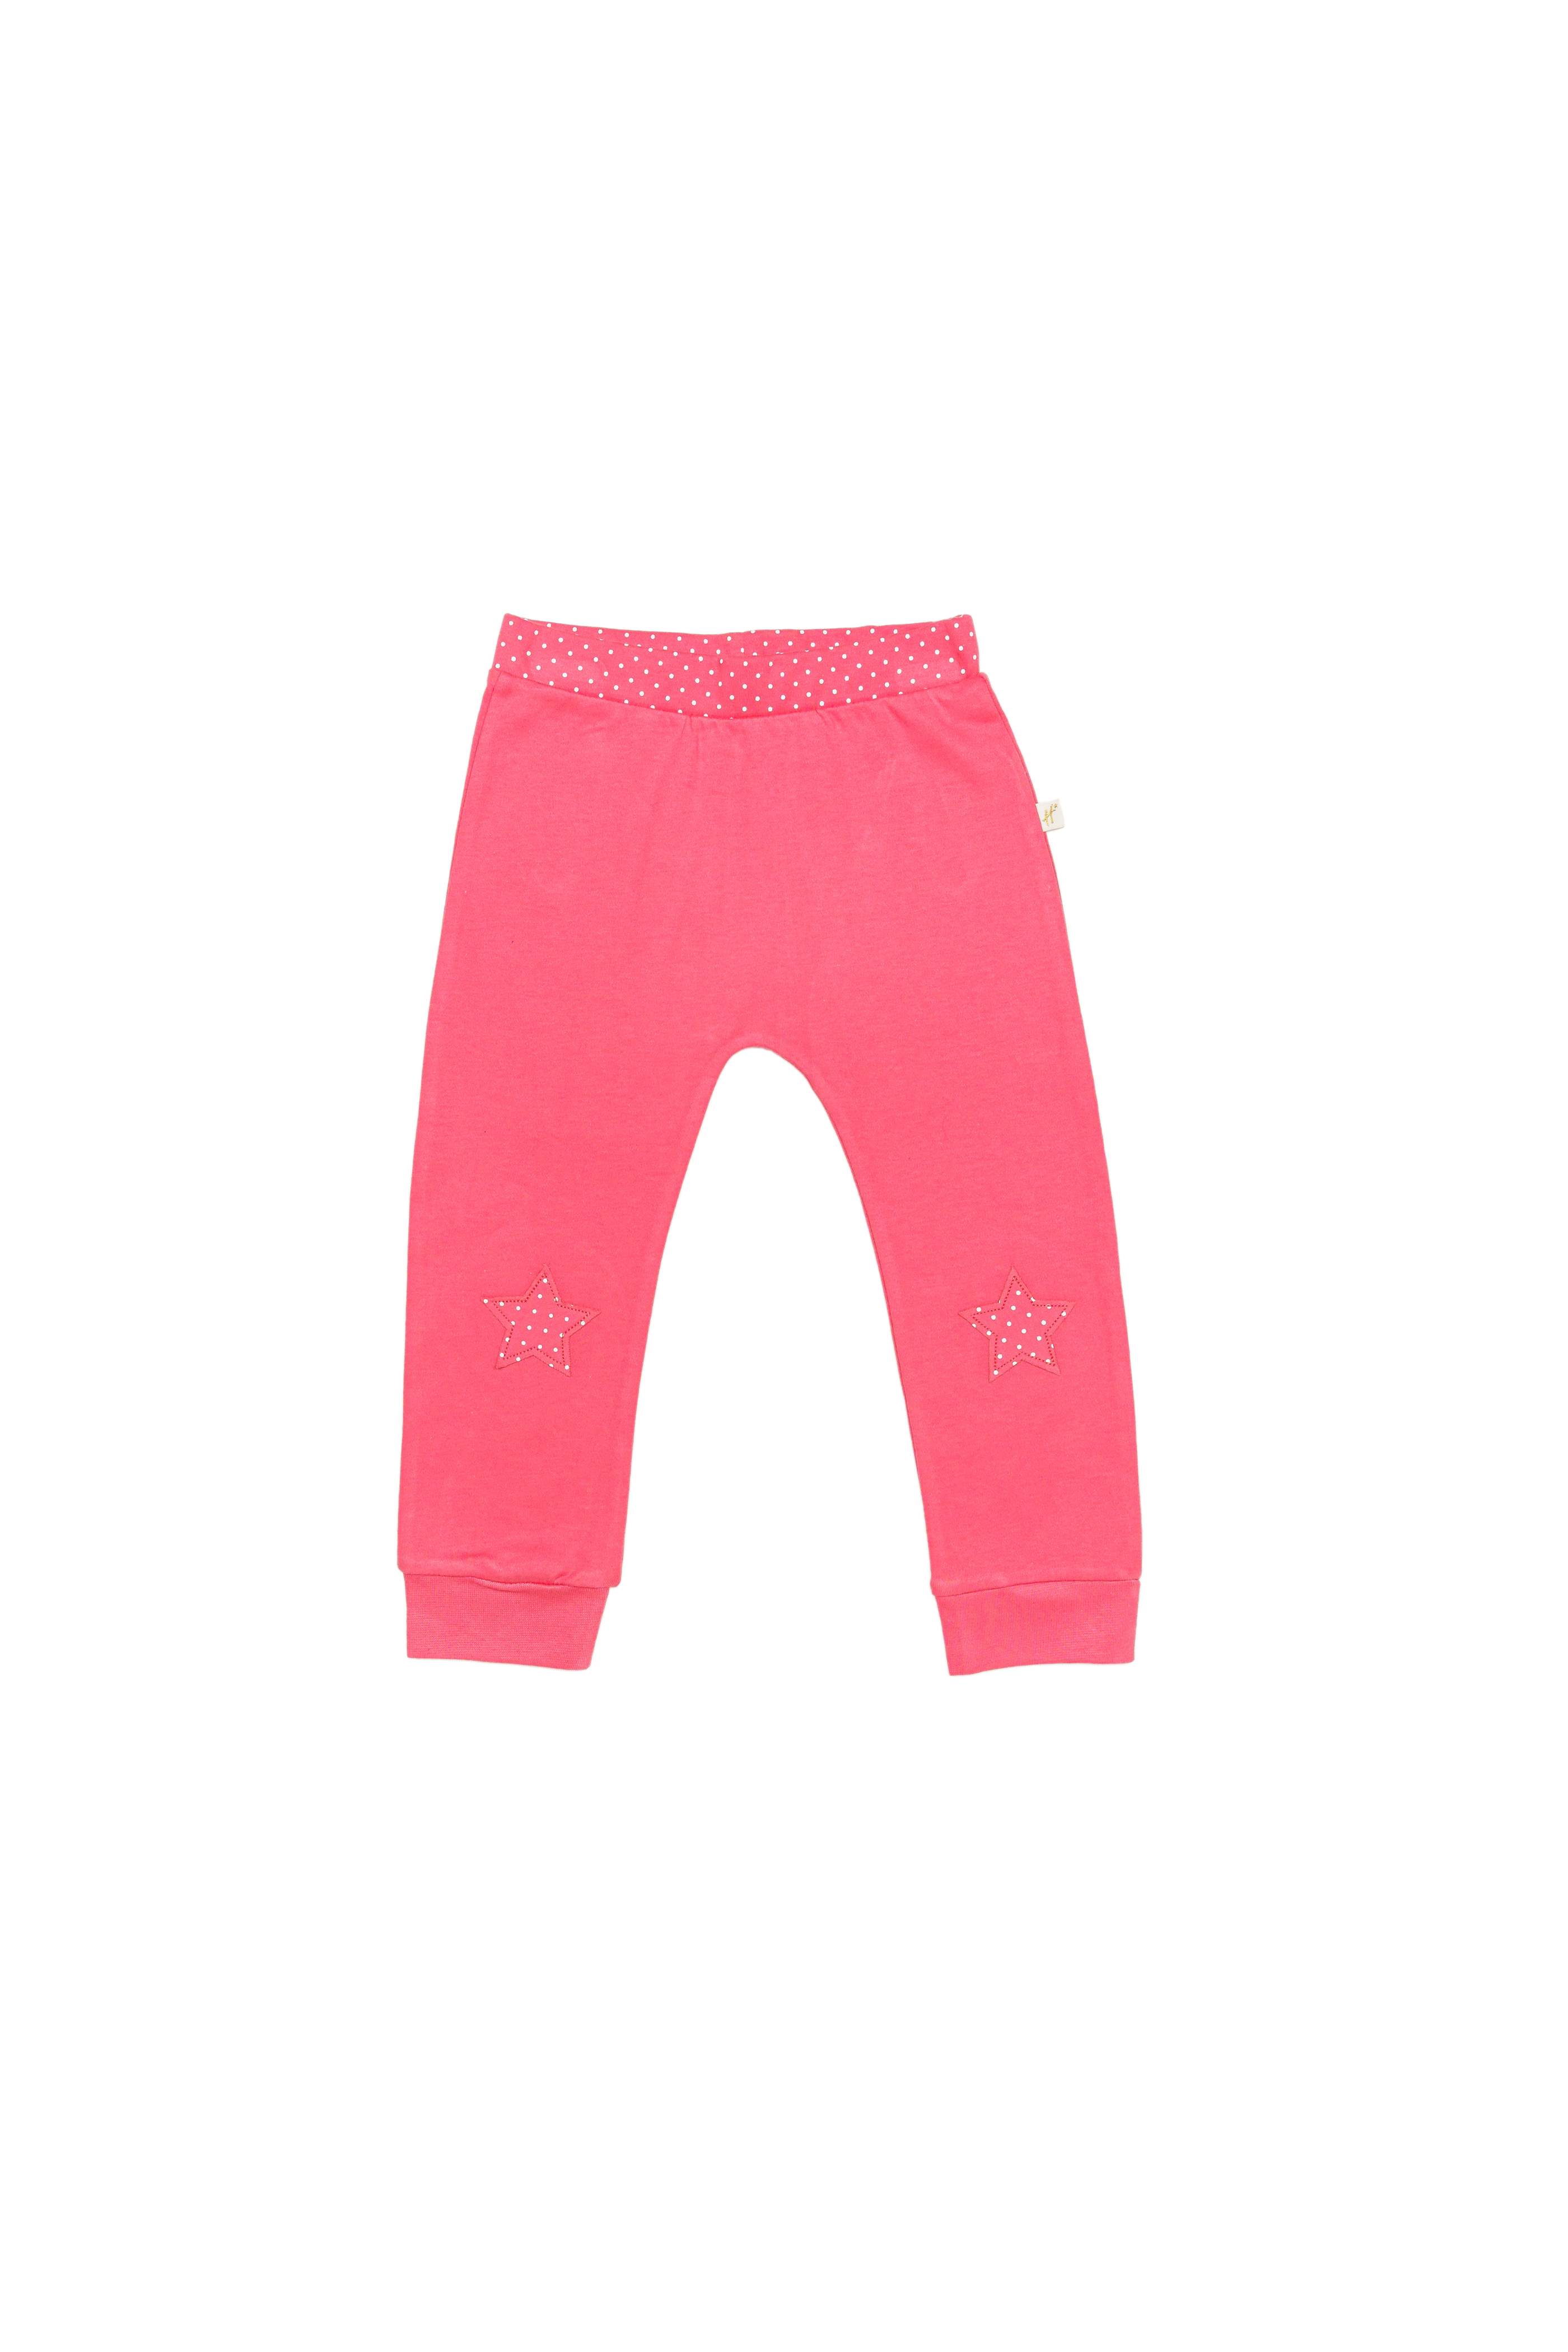 H by Hamleys Infant Girls Applique Pink Joggers